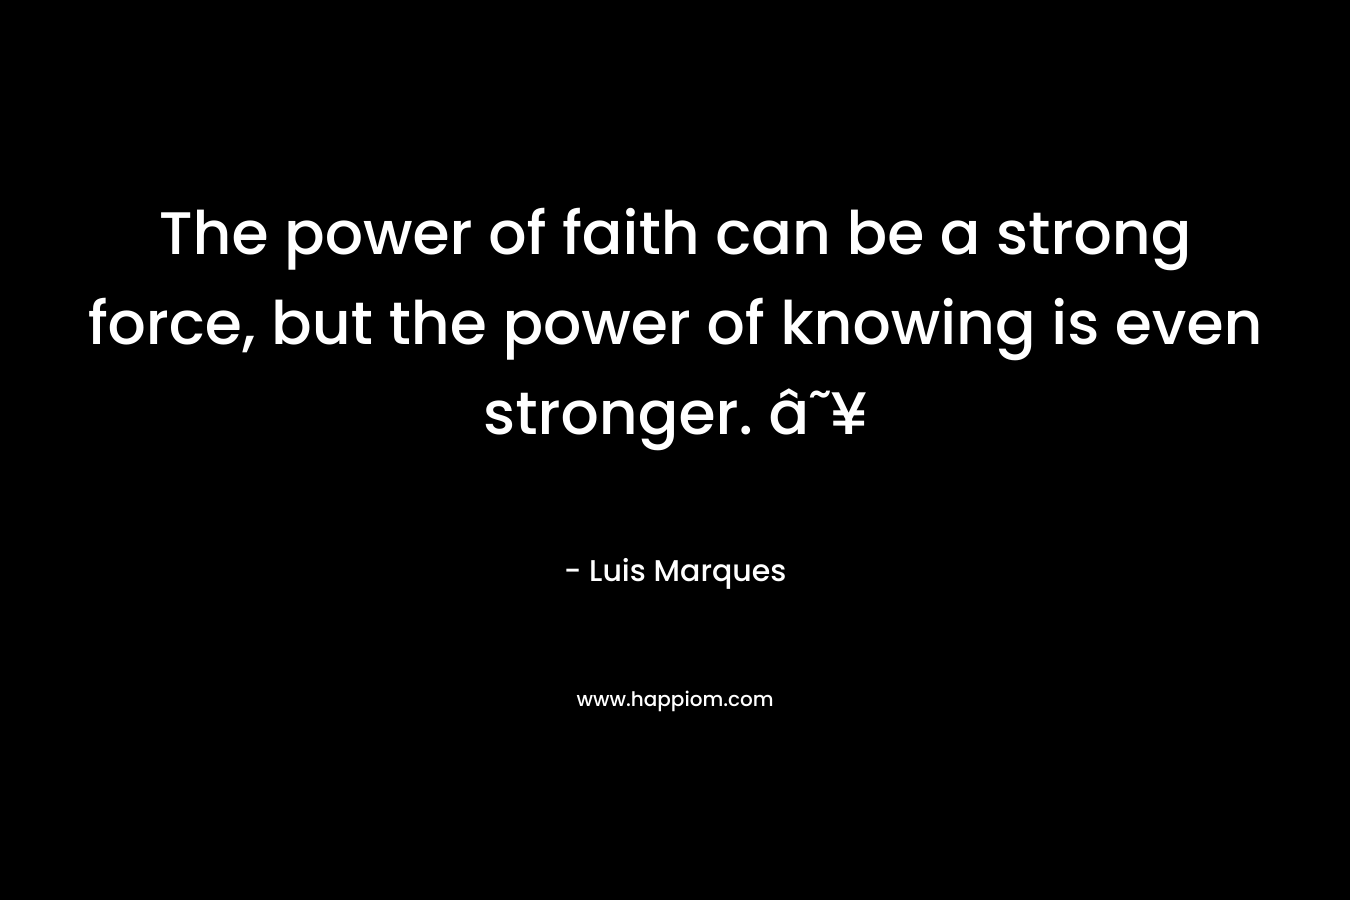 The power of faith can be a strong force, but the power of knowing is even stronger. â˜¥